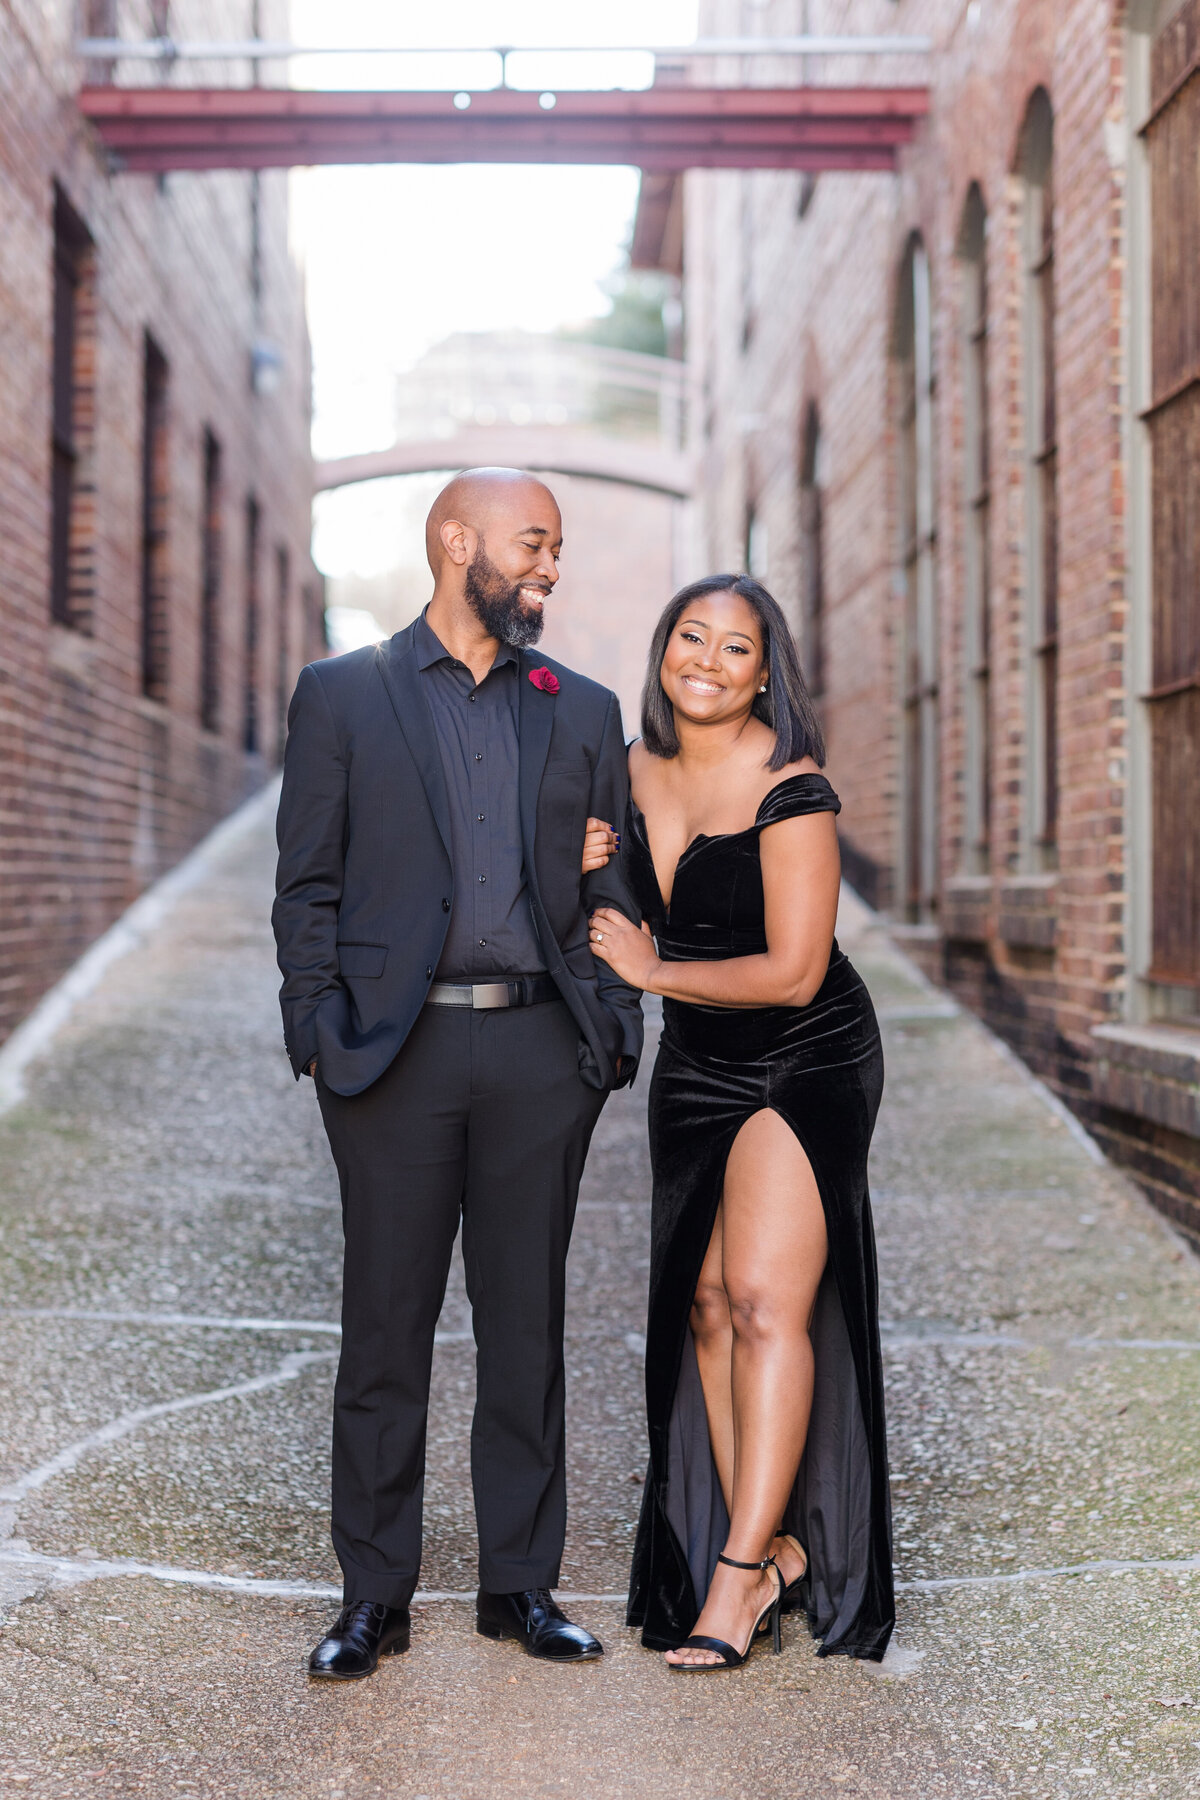 Downtown Raleigh engagement